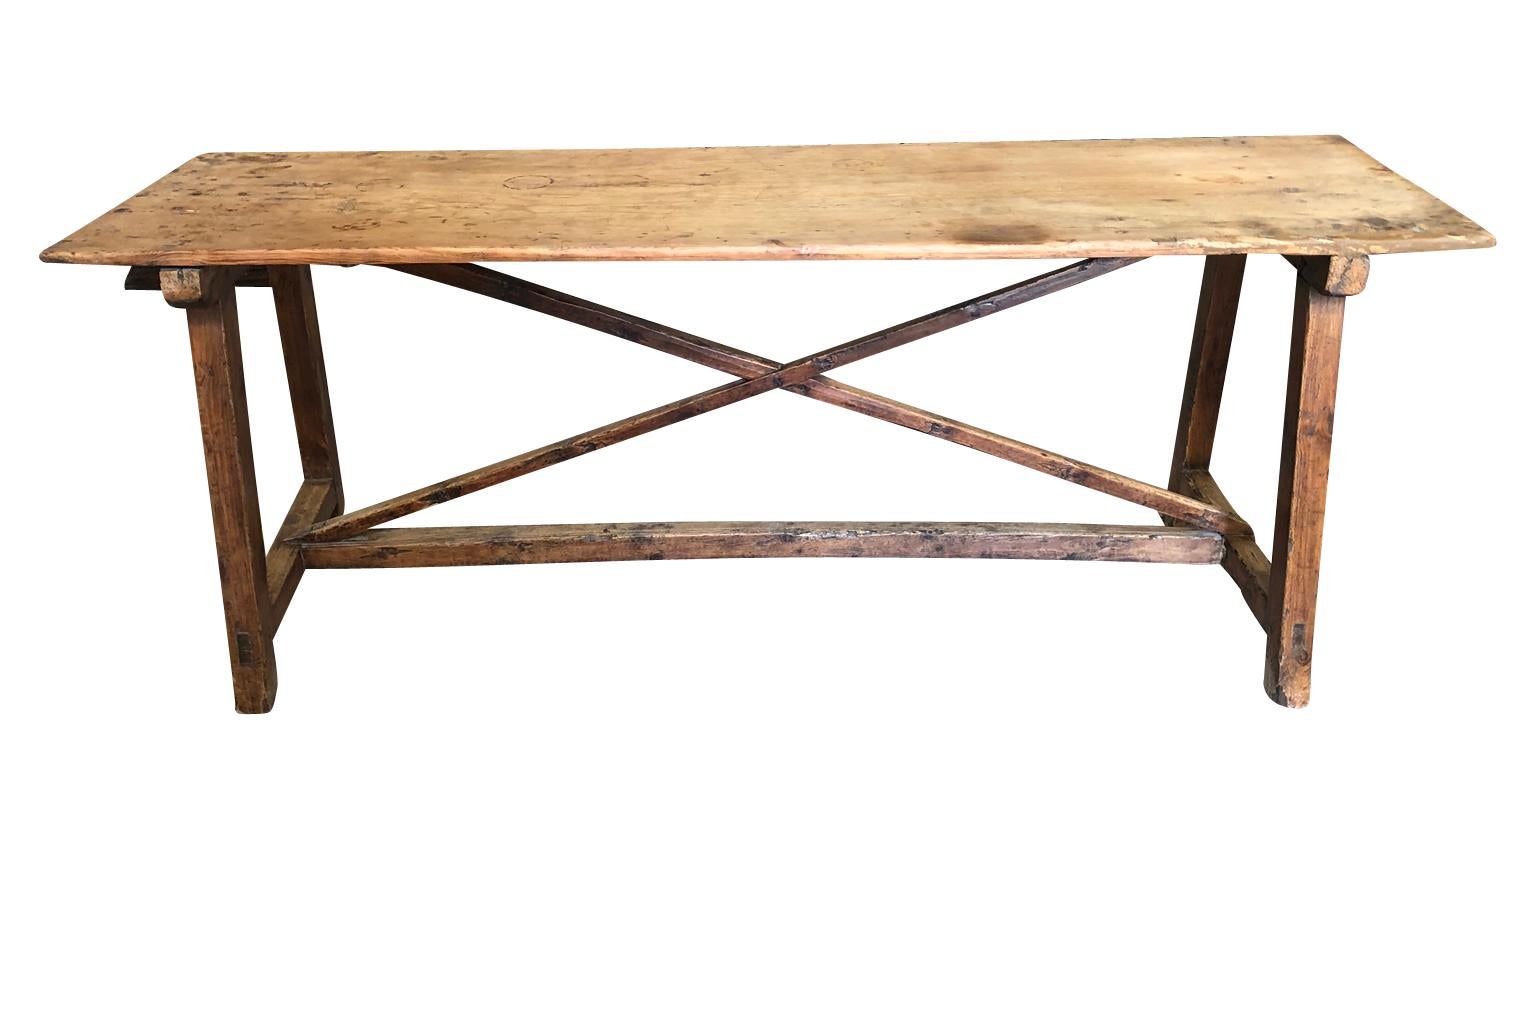 A very handsome early 18th century console table from Spain. Soundly constructed from beautifully patina'd pine with a solid board top. Wonderful minimalist design. Also serves wonderfully as a narrow dining table or desk.